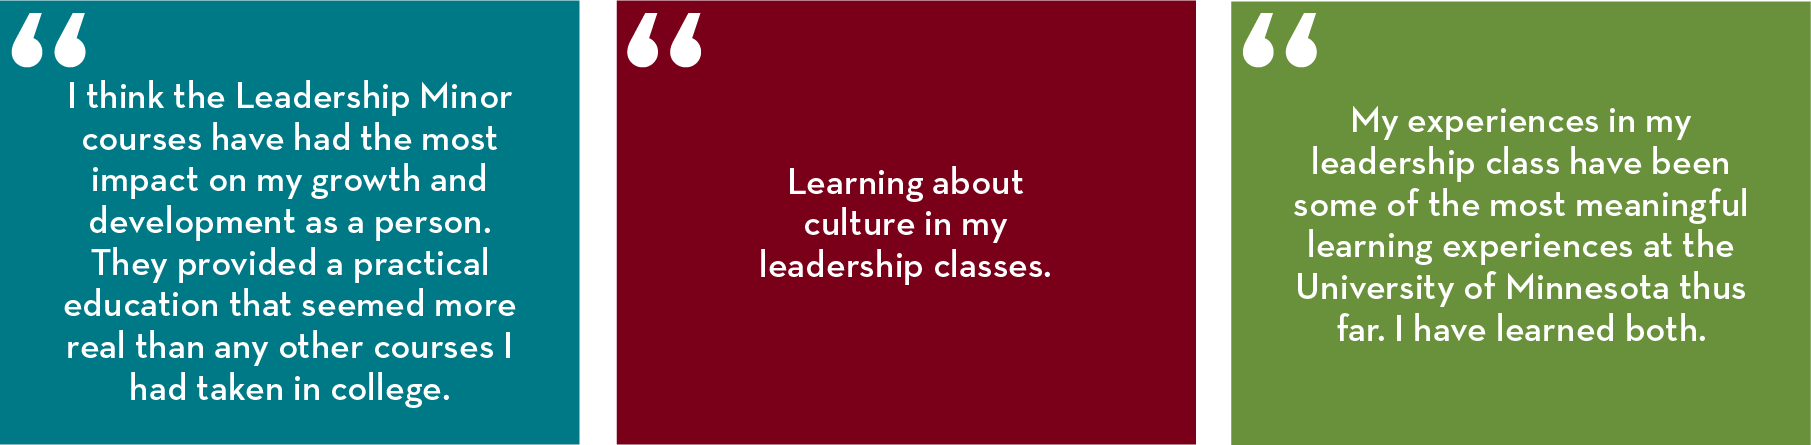 “I think the Leadership Minor courses have had the most impact on my growth and development as a person. They provided a practical education that seemed more real than any other courses I had taken in college.” 